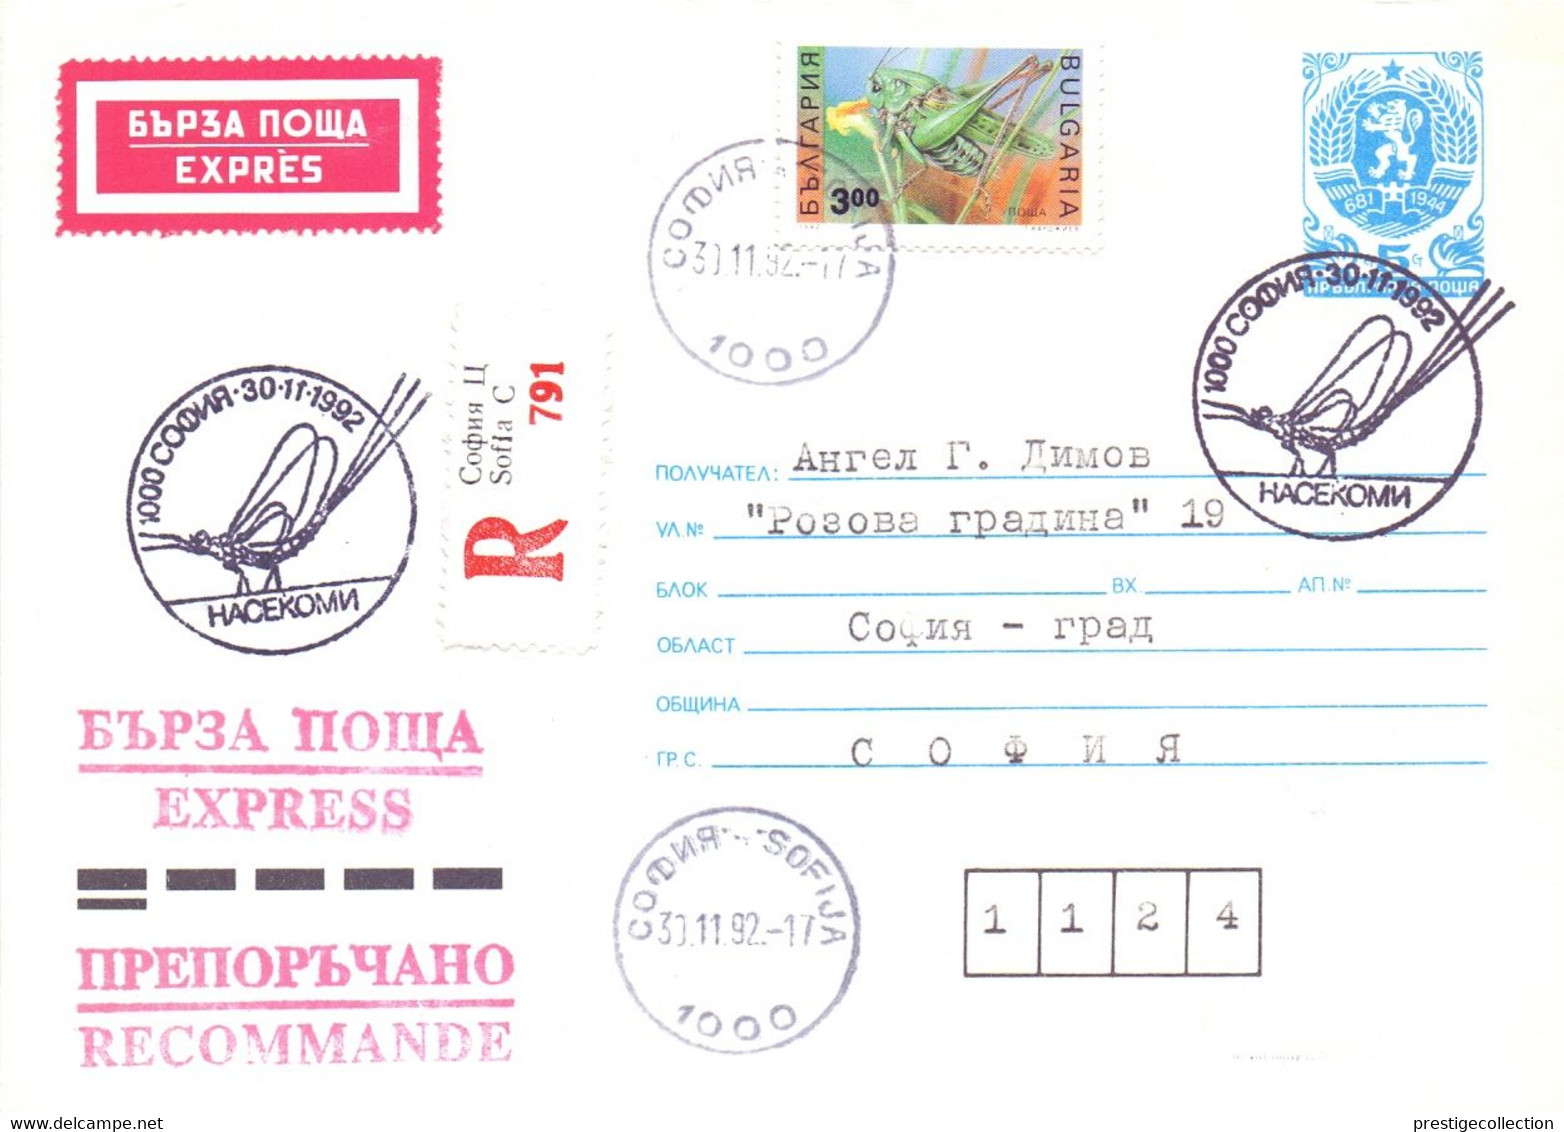 BULGARIA EXPRES  END REGISTRED MAIL 1992  POST MAIL  COVER    (OTT200139) - Exprespost